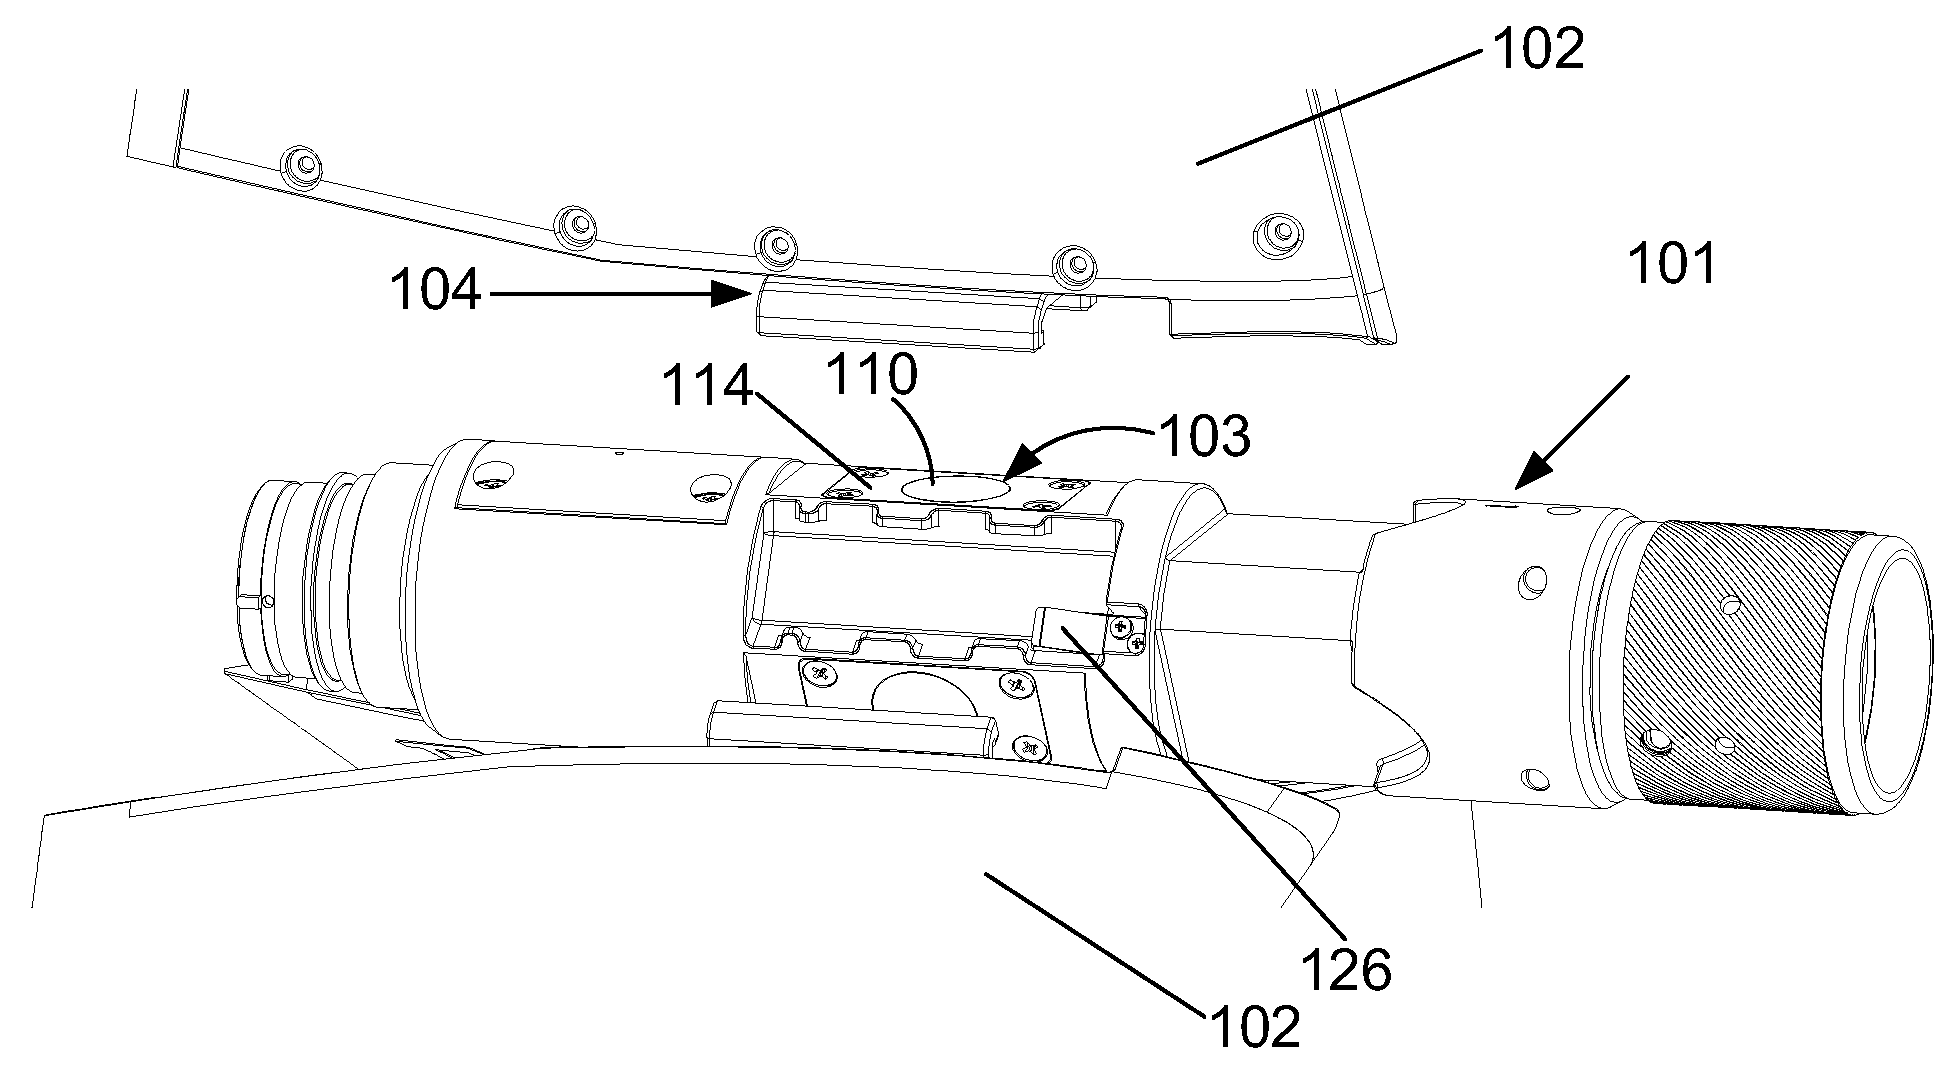 Device for controlling the position of an instrument cable towed in water